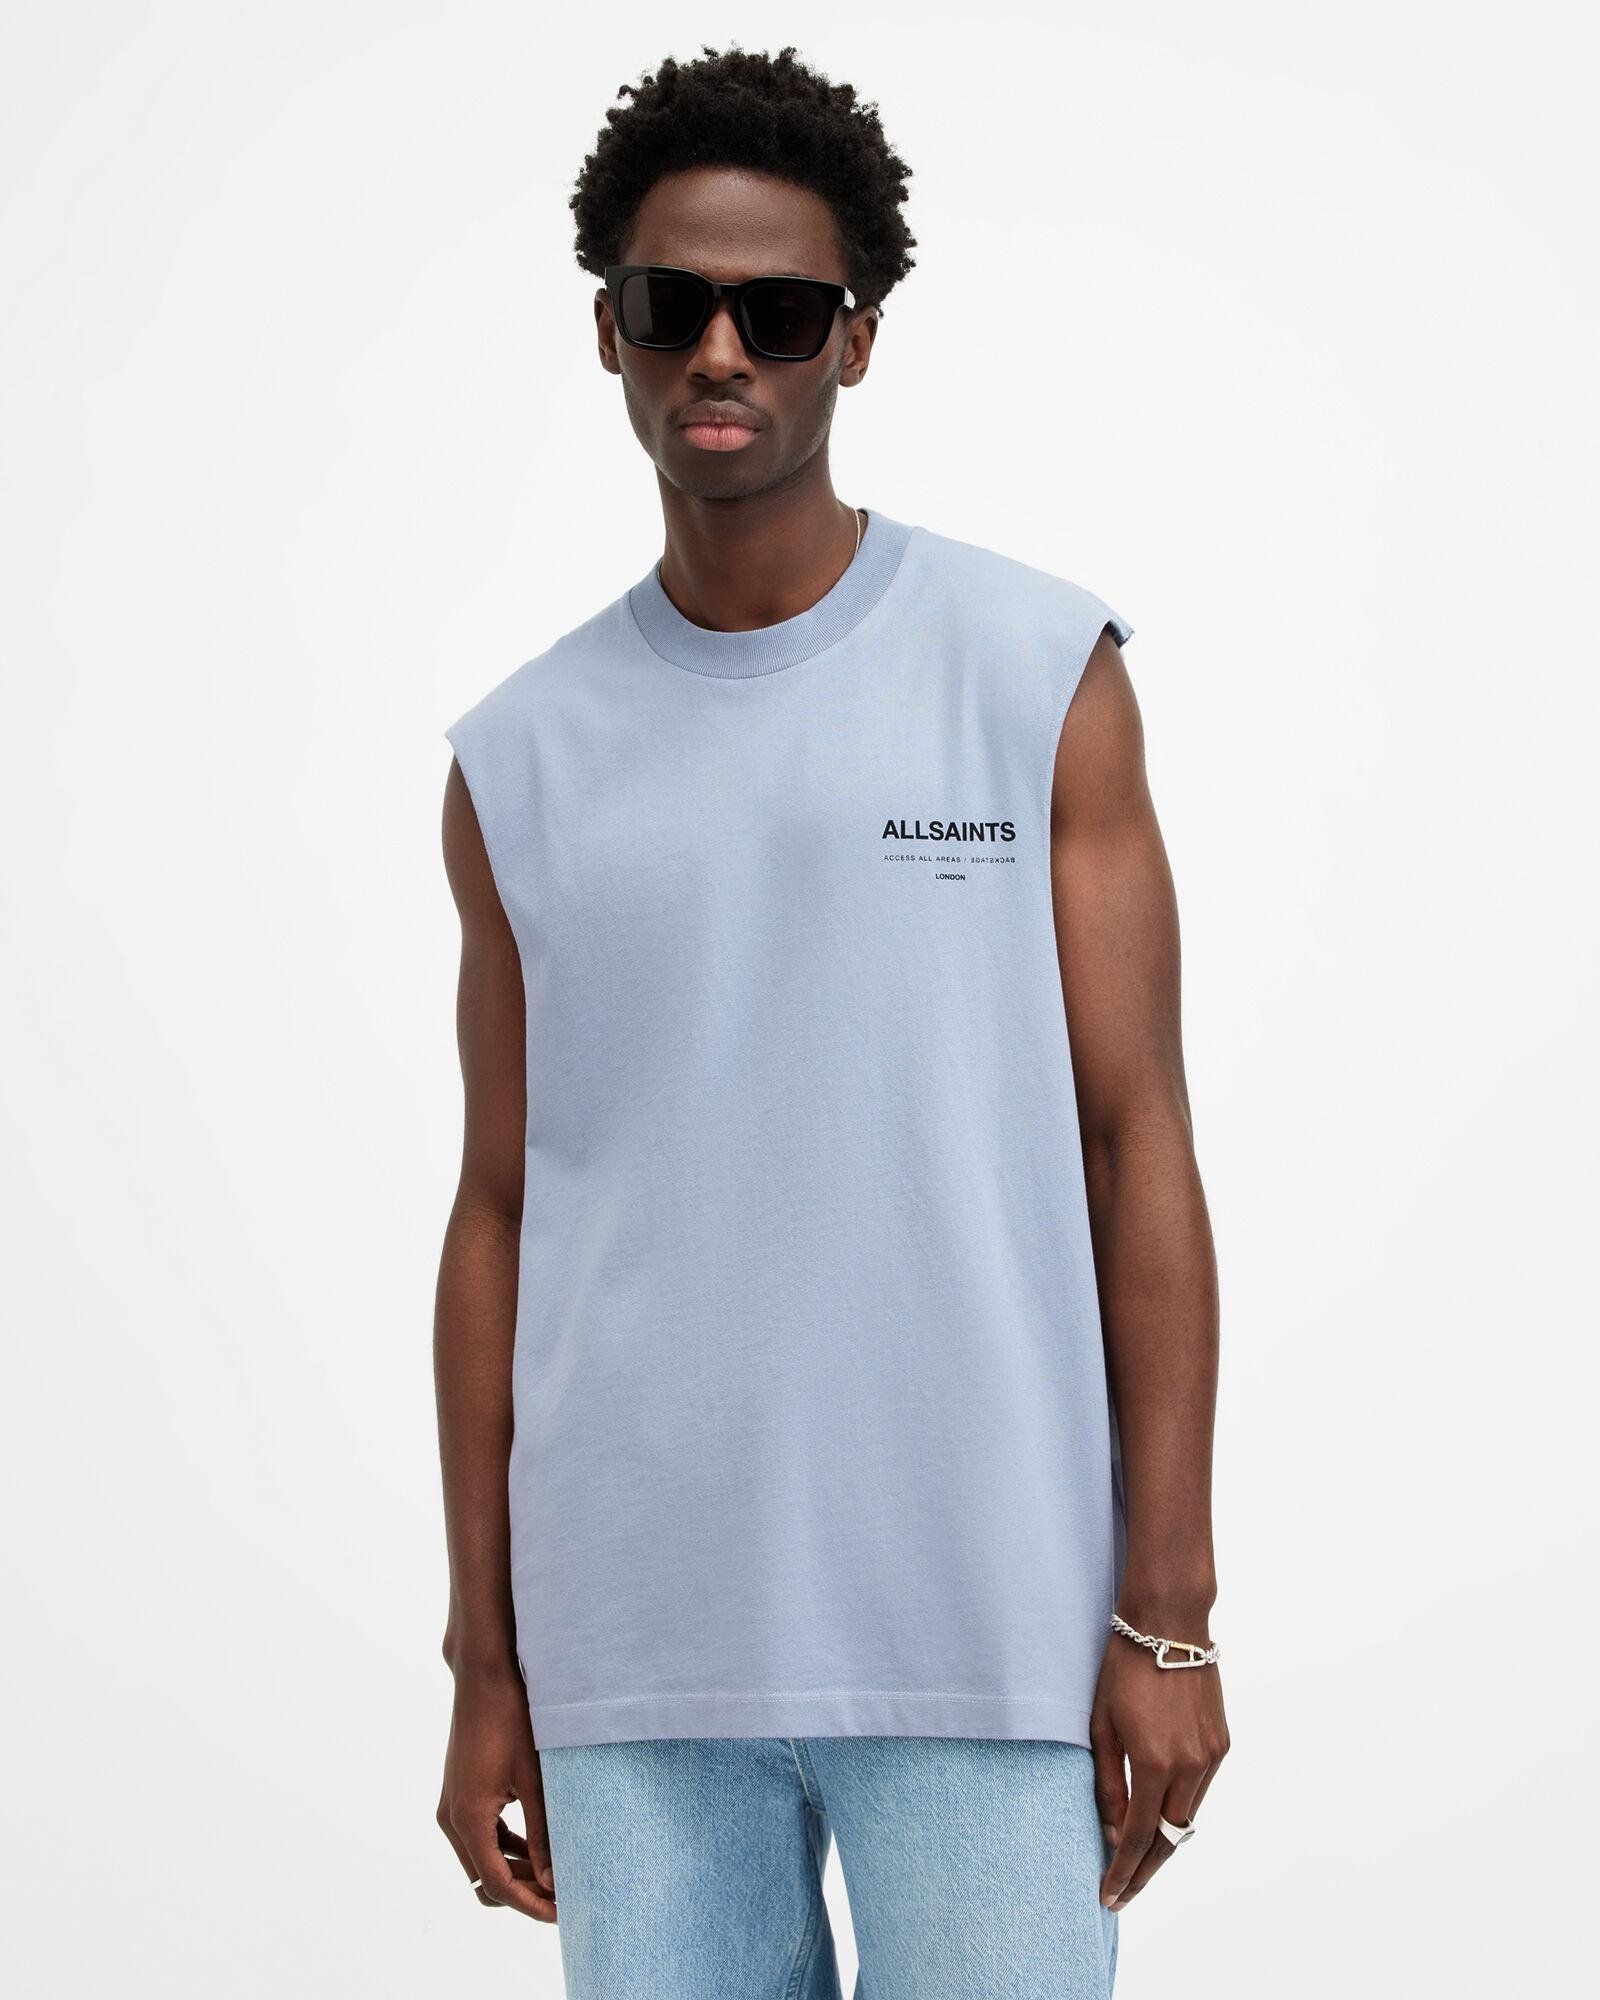 Access Relaxed Fit Sleeveless Tank Top by ALLSAINTS